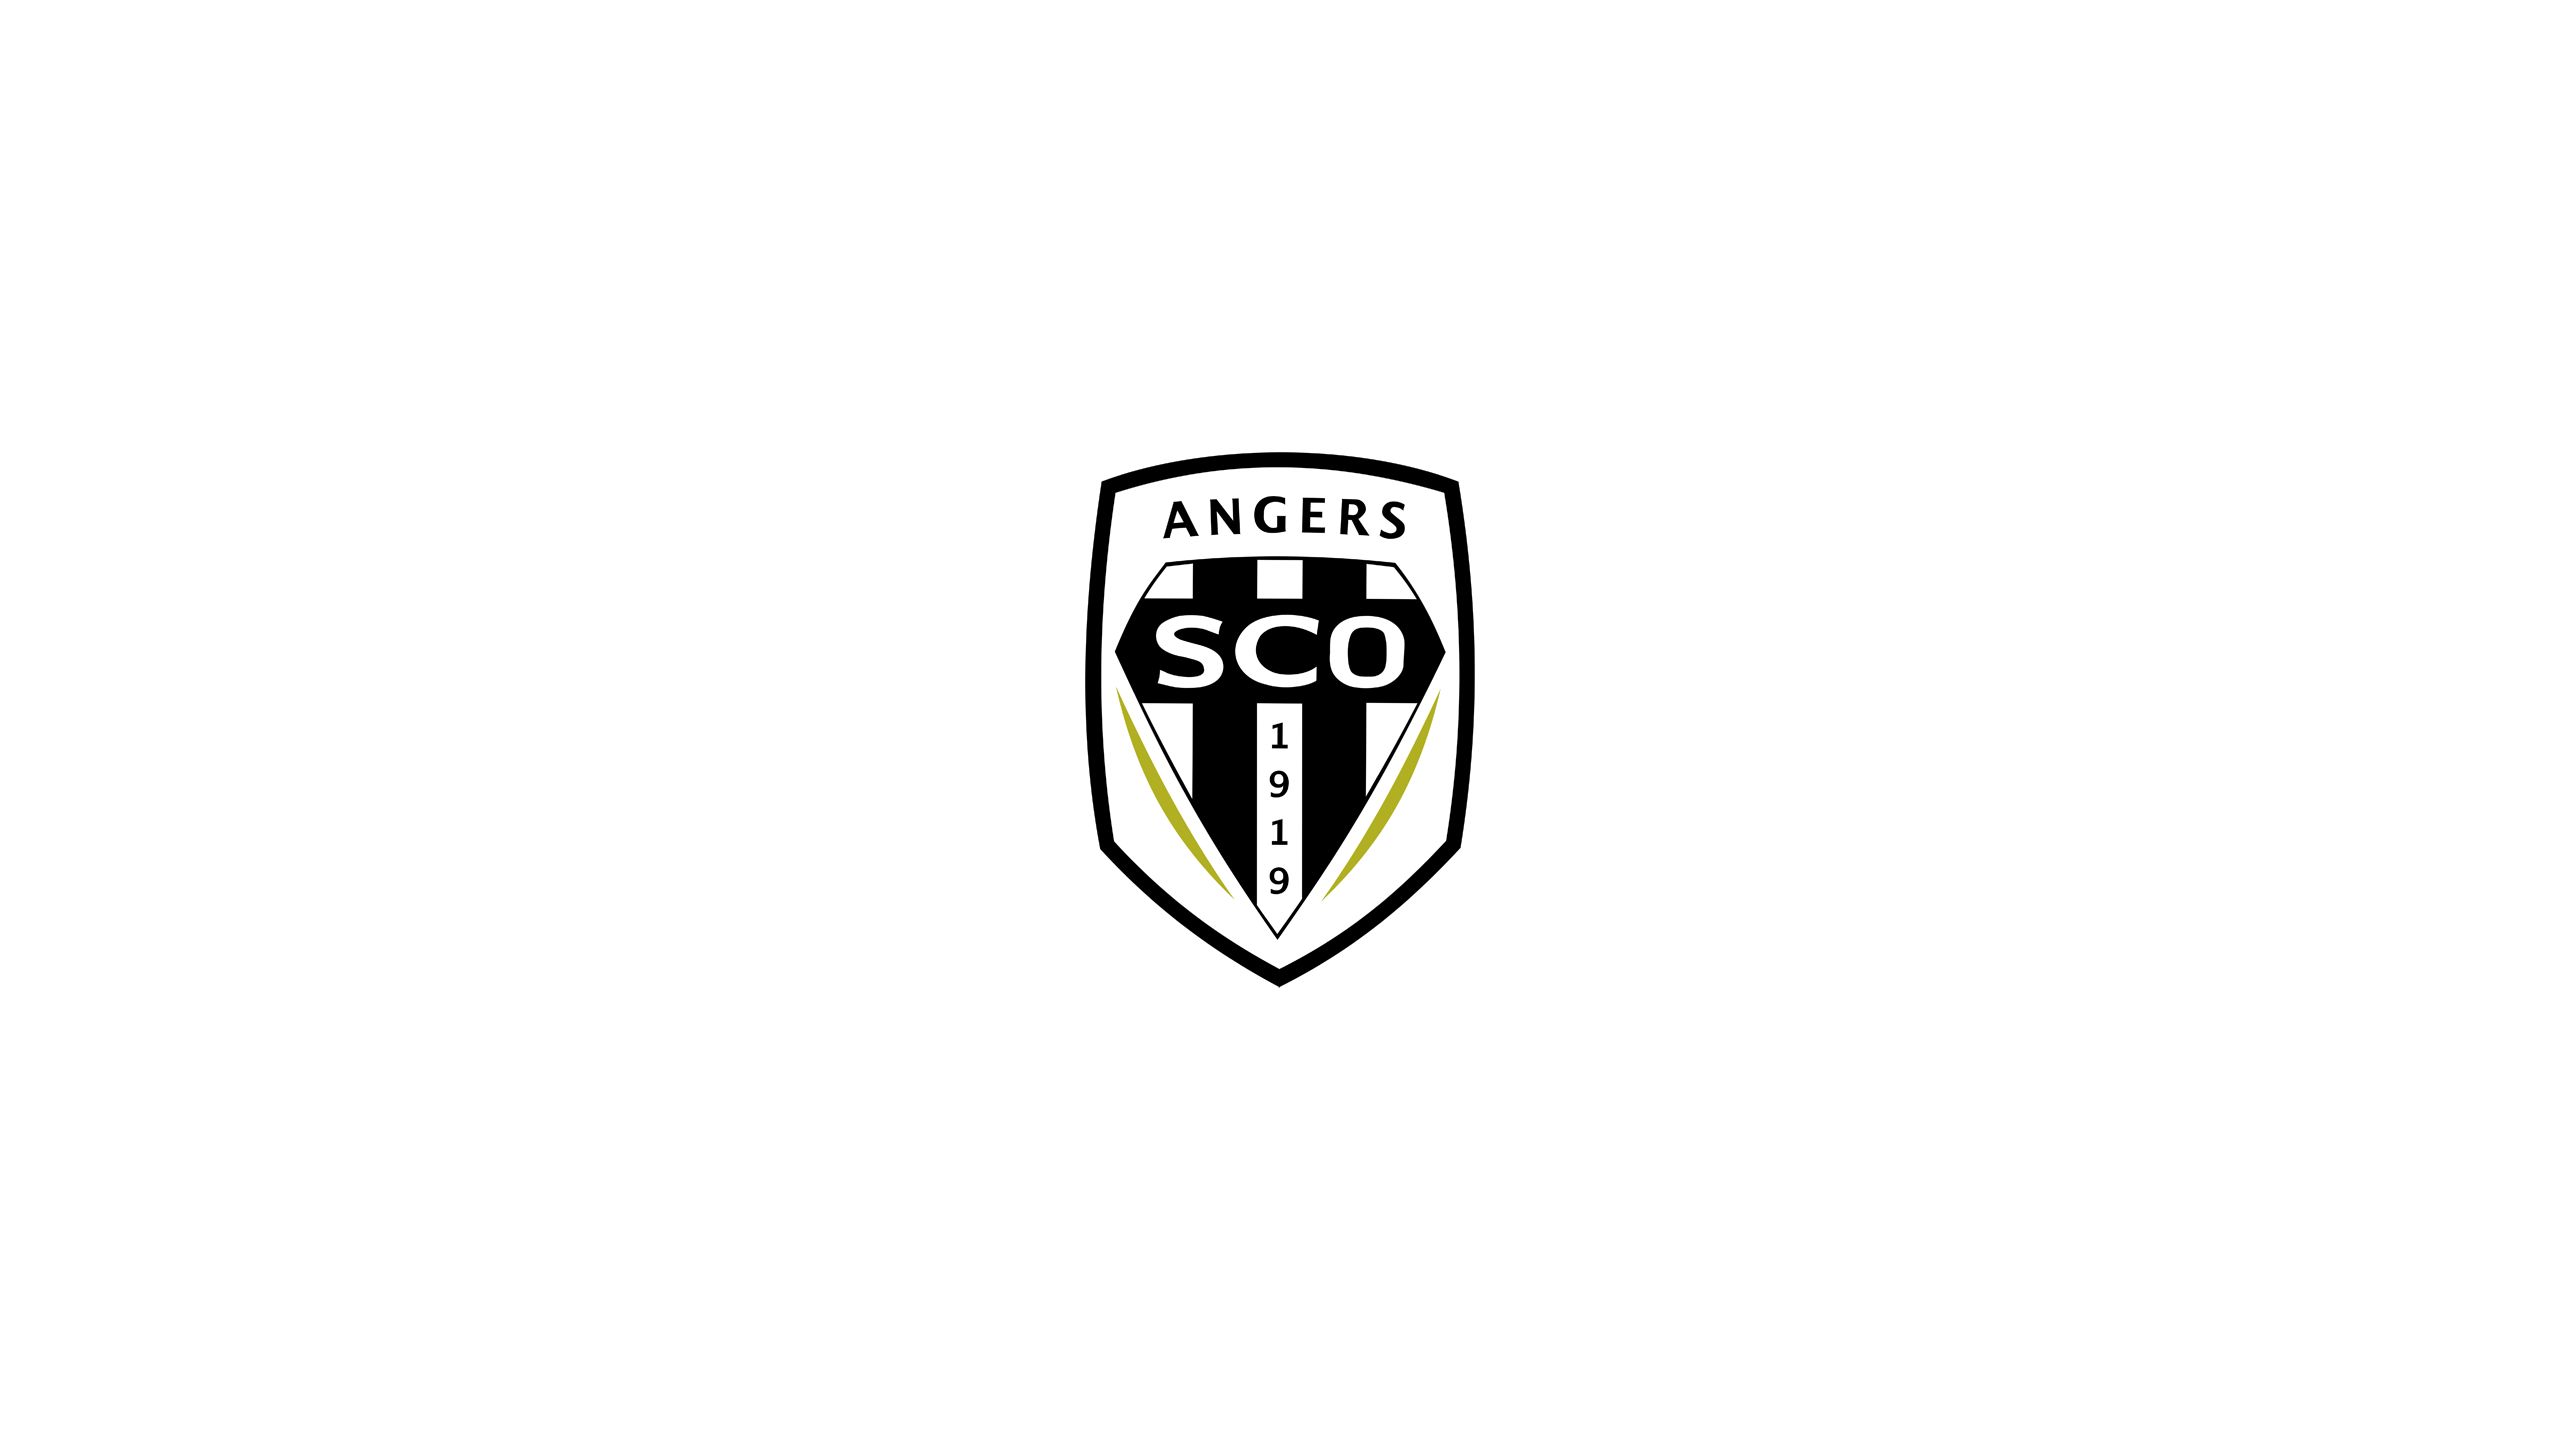 8k Angers Sco Images